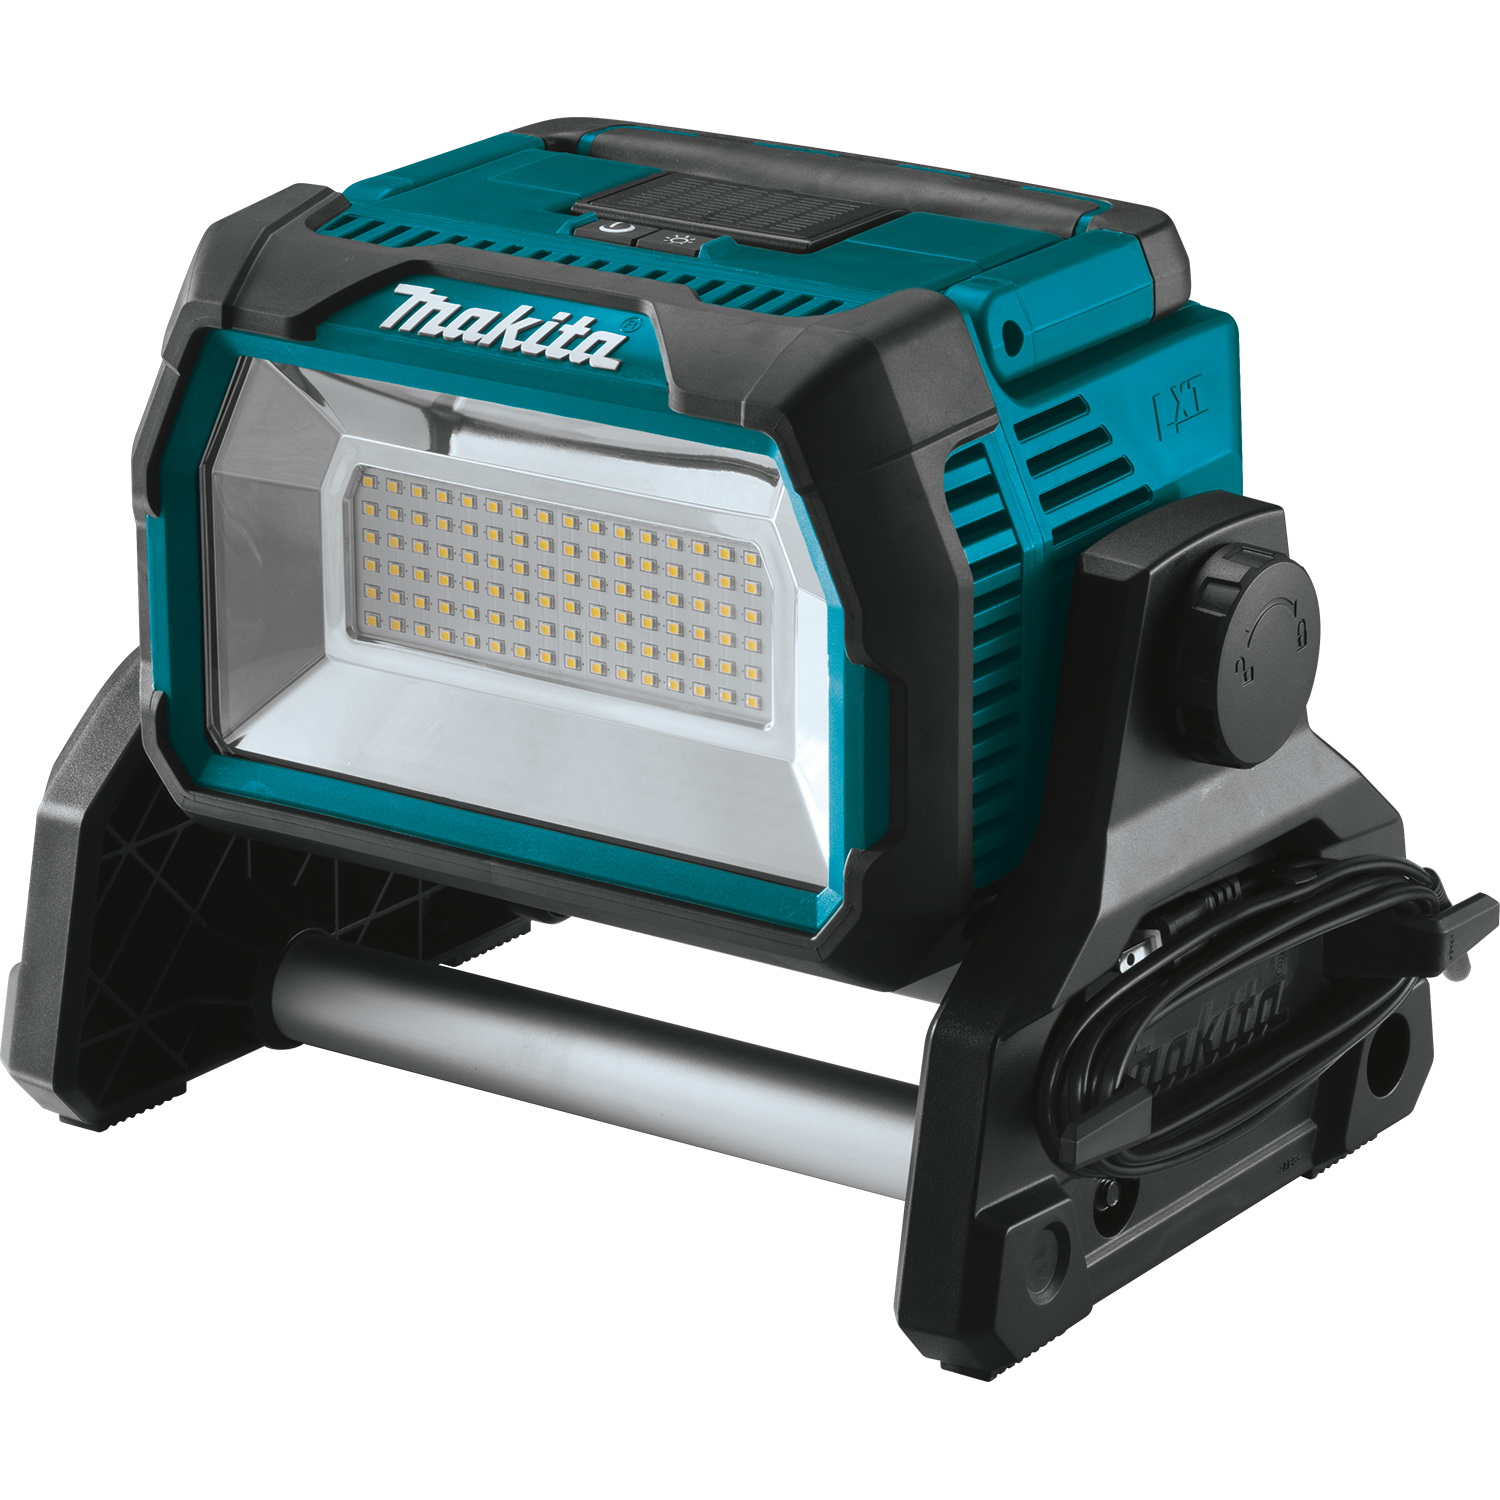 LXT Series DML809 Cordless/Corded Work Light, 120 VAC, 100.8 W, LXT Lithium-Ion Battery, 96-Lamp, LED Lamp